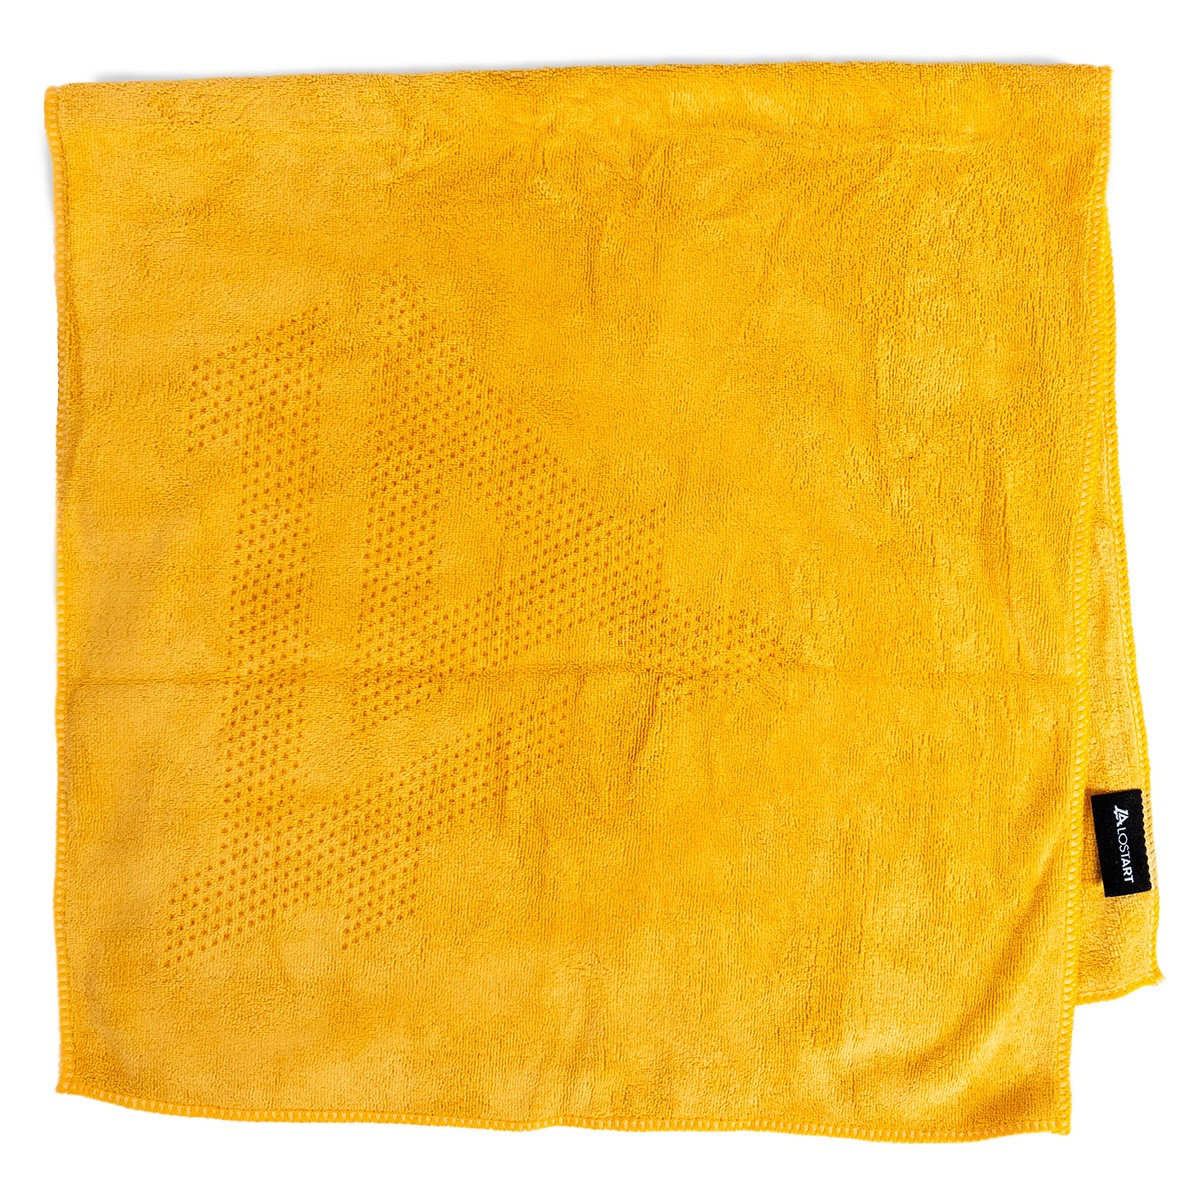 Lost Art Canada - yellow rink rag hand towel top view